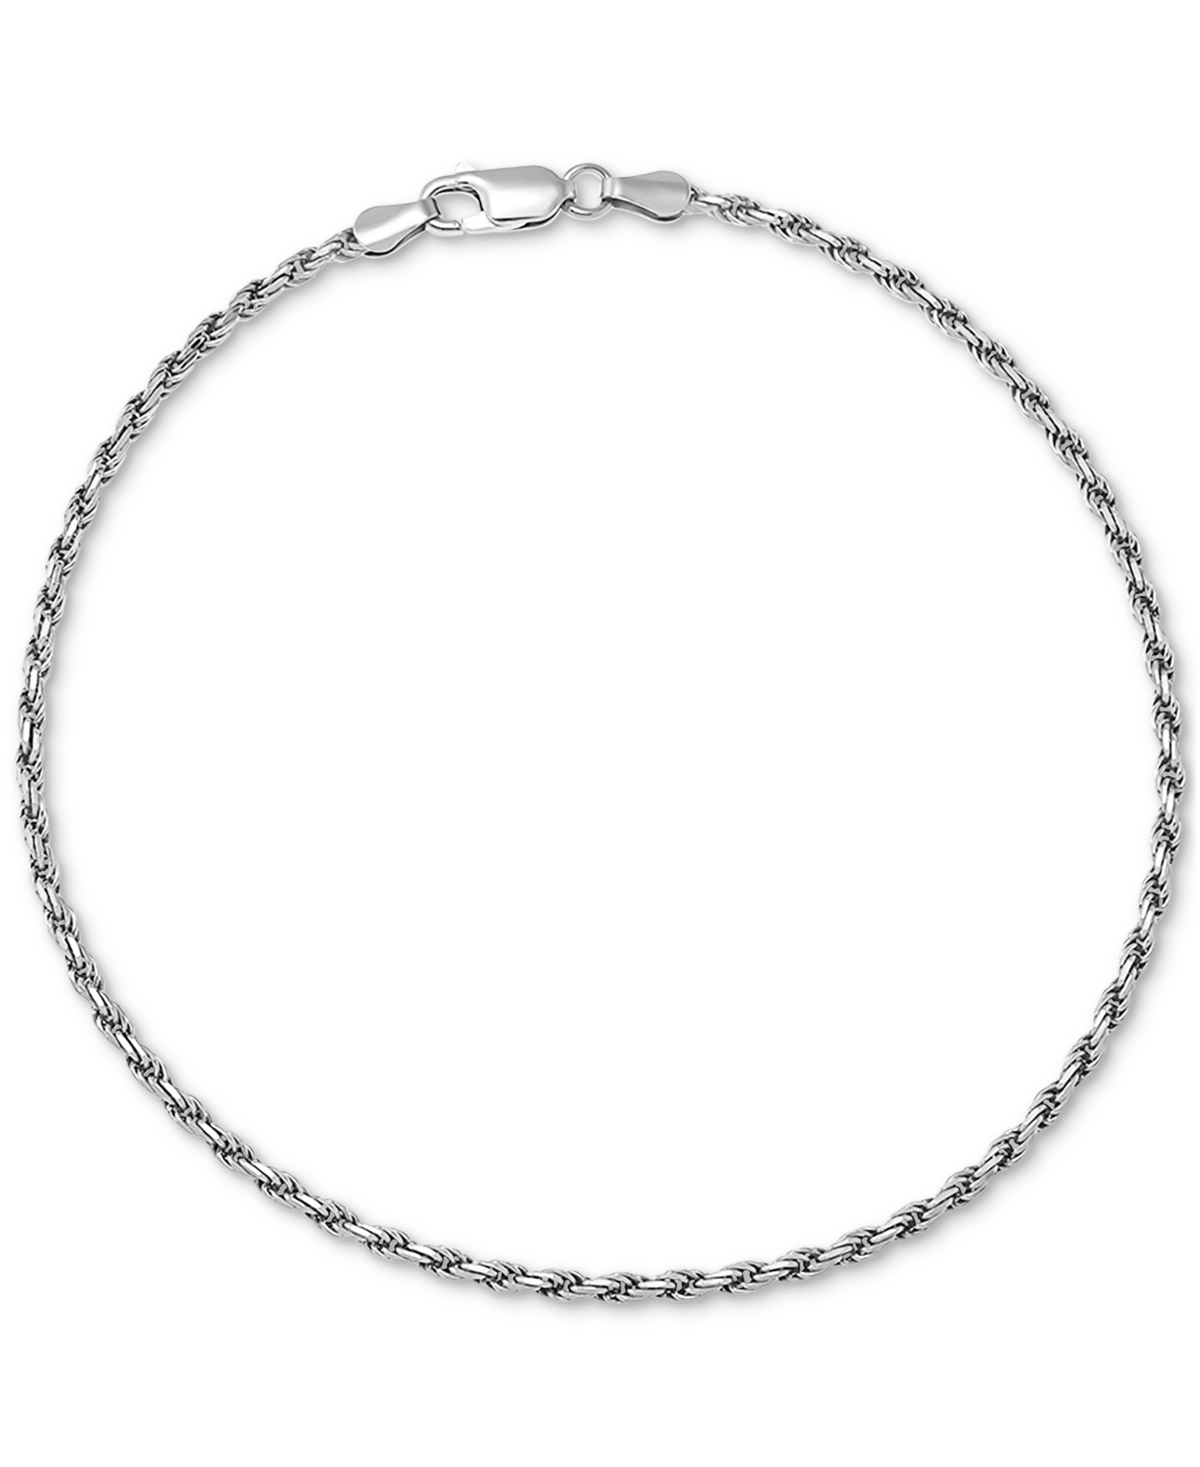 GIANI BERNINI ROPE CHAIN ANKLE BRACELET (2MM) IN 18K GOLD-PLATED STERLING SILVER OR STERLING SILVER, CREATED FOR M